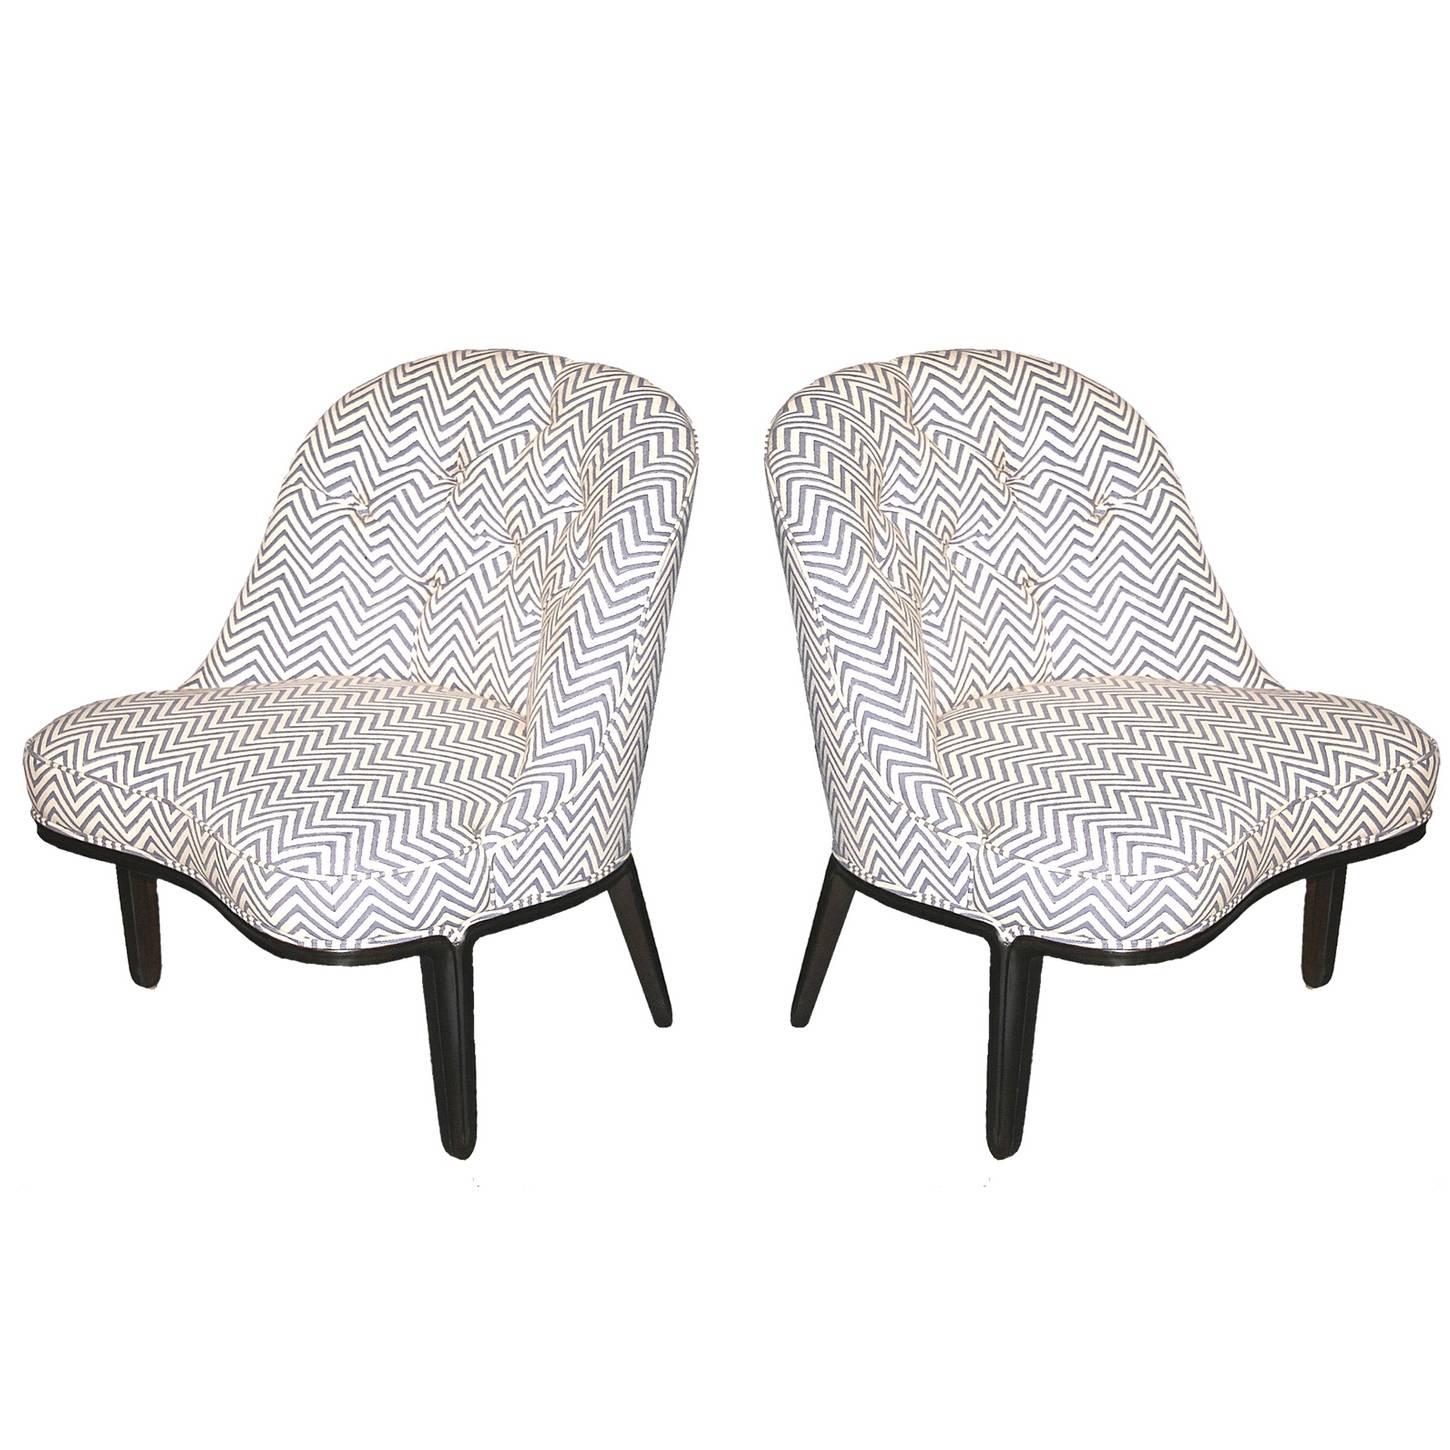 Edward Wormley for Dunbar Janus Collection Slipper Chairs